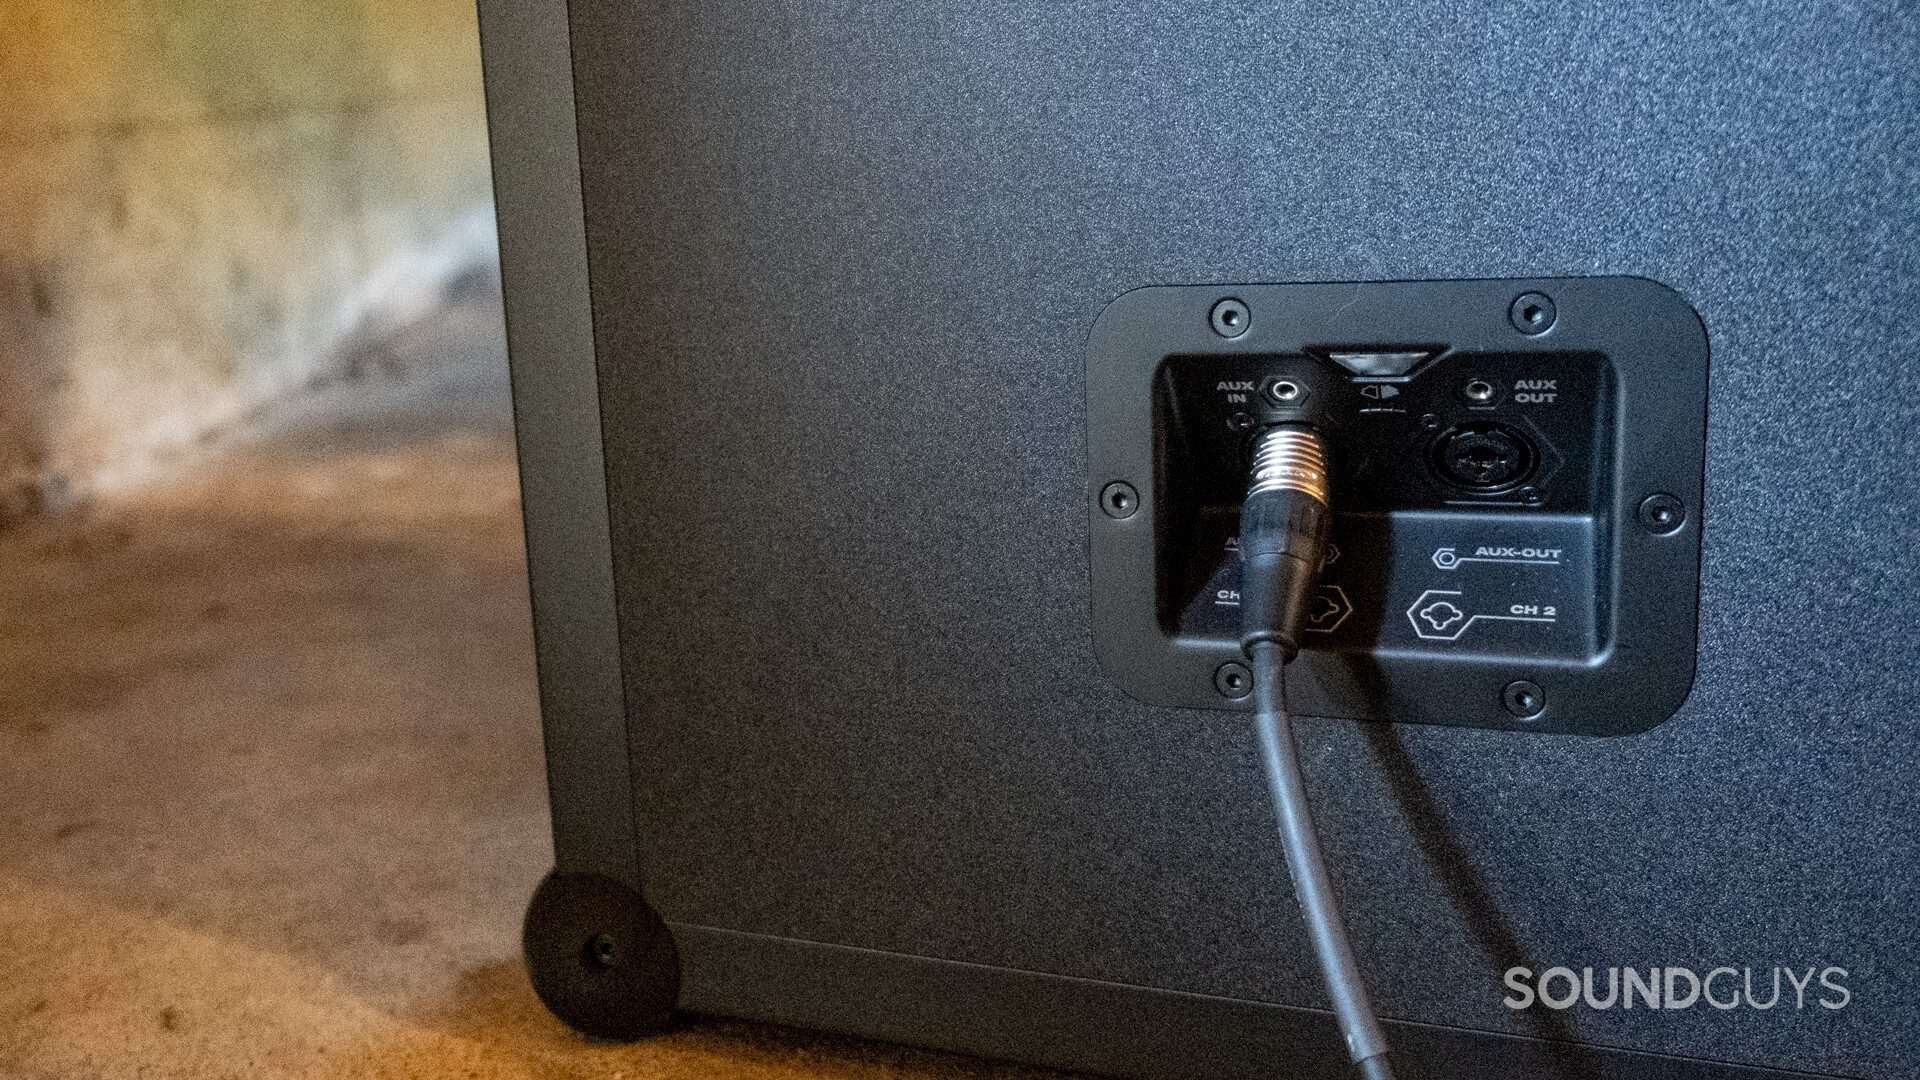 An XLR cable plugged into the Ch. 1 port of the SoundBoks (Gen. 3).